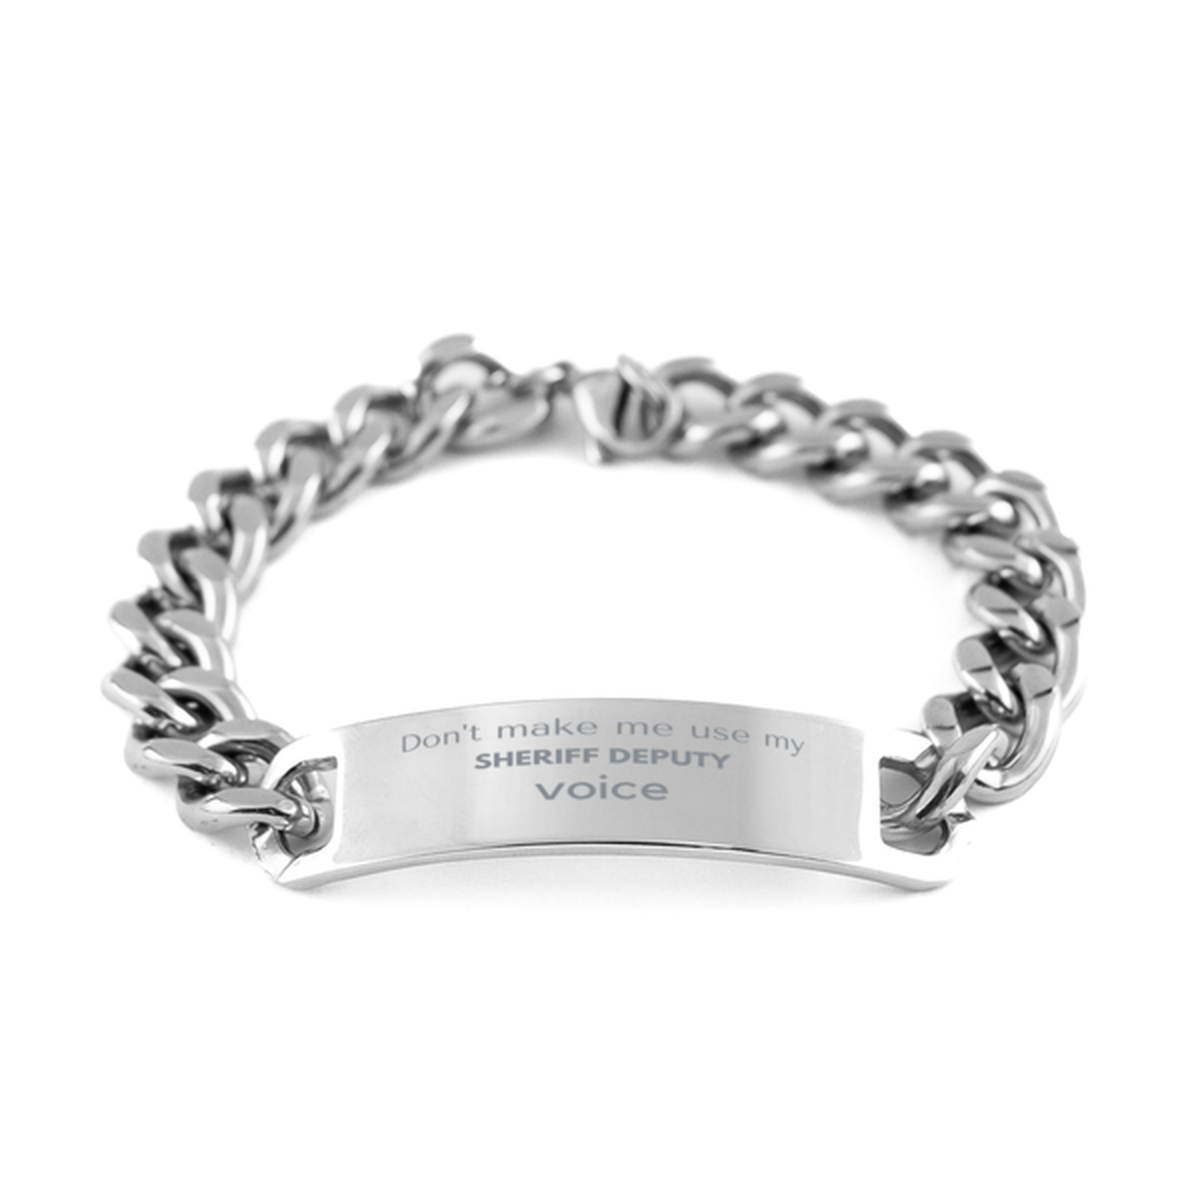 Don't make me use my Sheriff Deputy voice, Sarcasm Sheriff Deputy Gifts, Christmas Sheriff Deputy Cuban Chain Stainless Steel Bracelet Birthday Unique Gifts For Sheriff Deputy Coworkers, Men, Women, Colleague, Friends